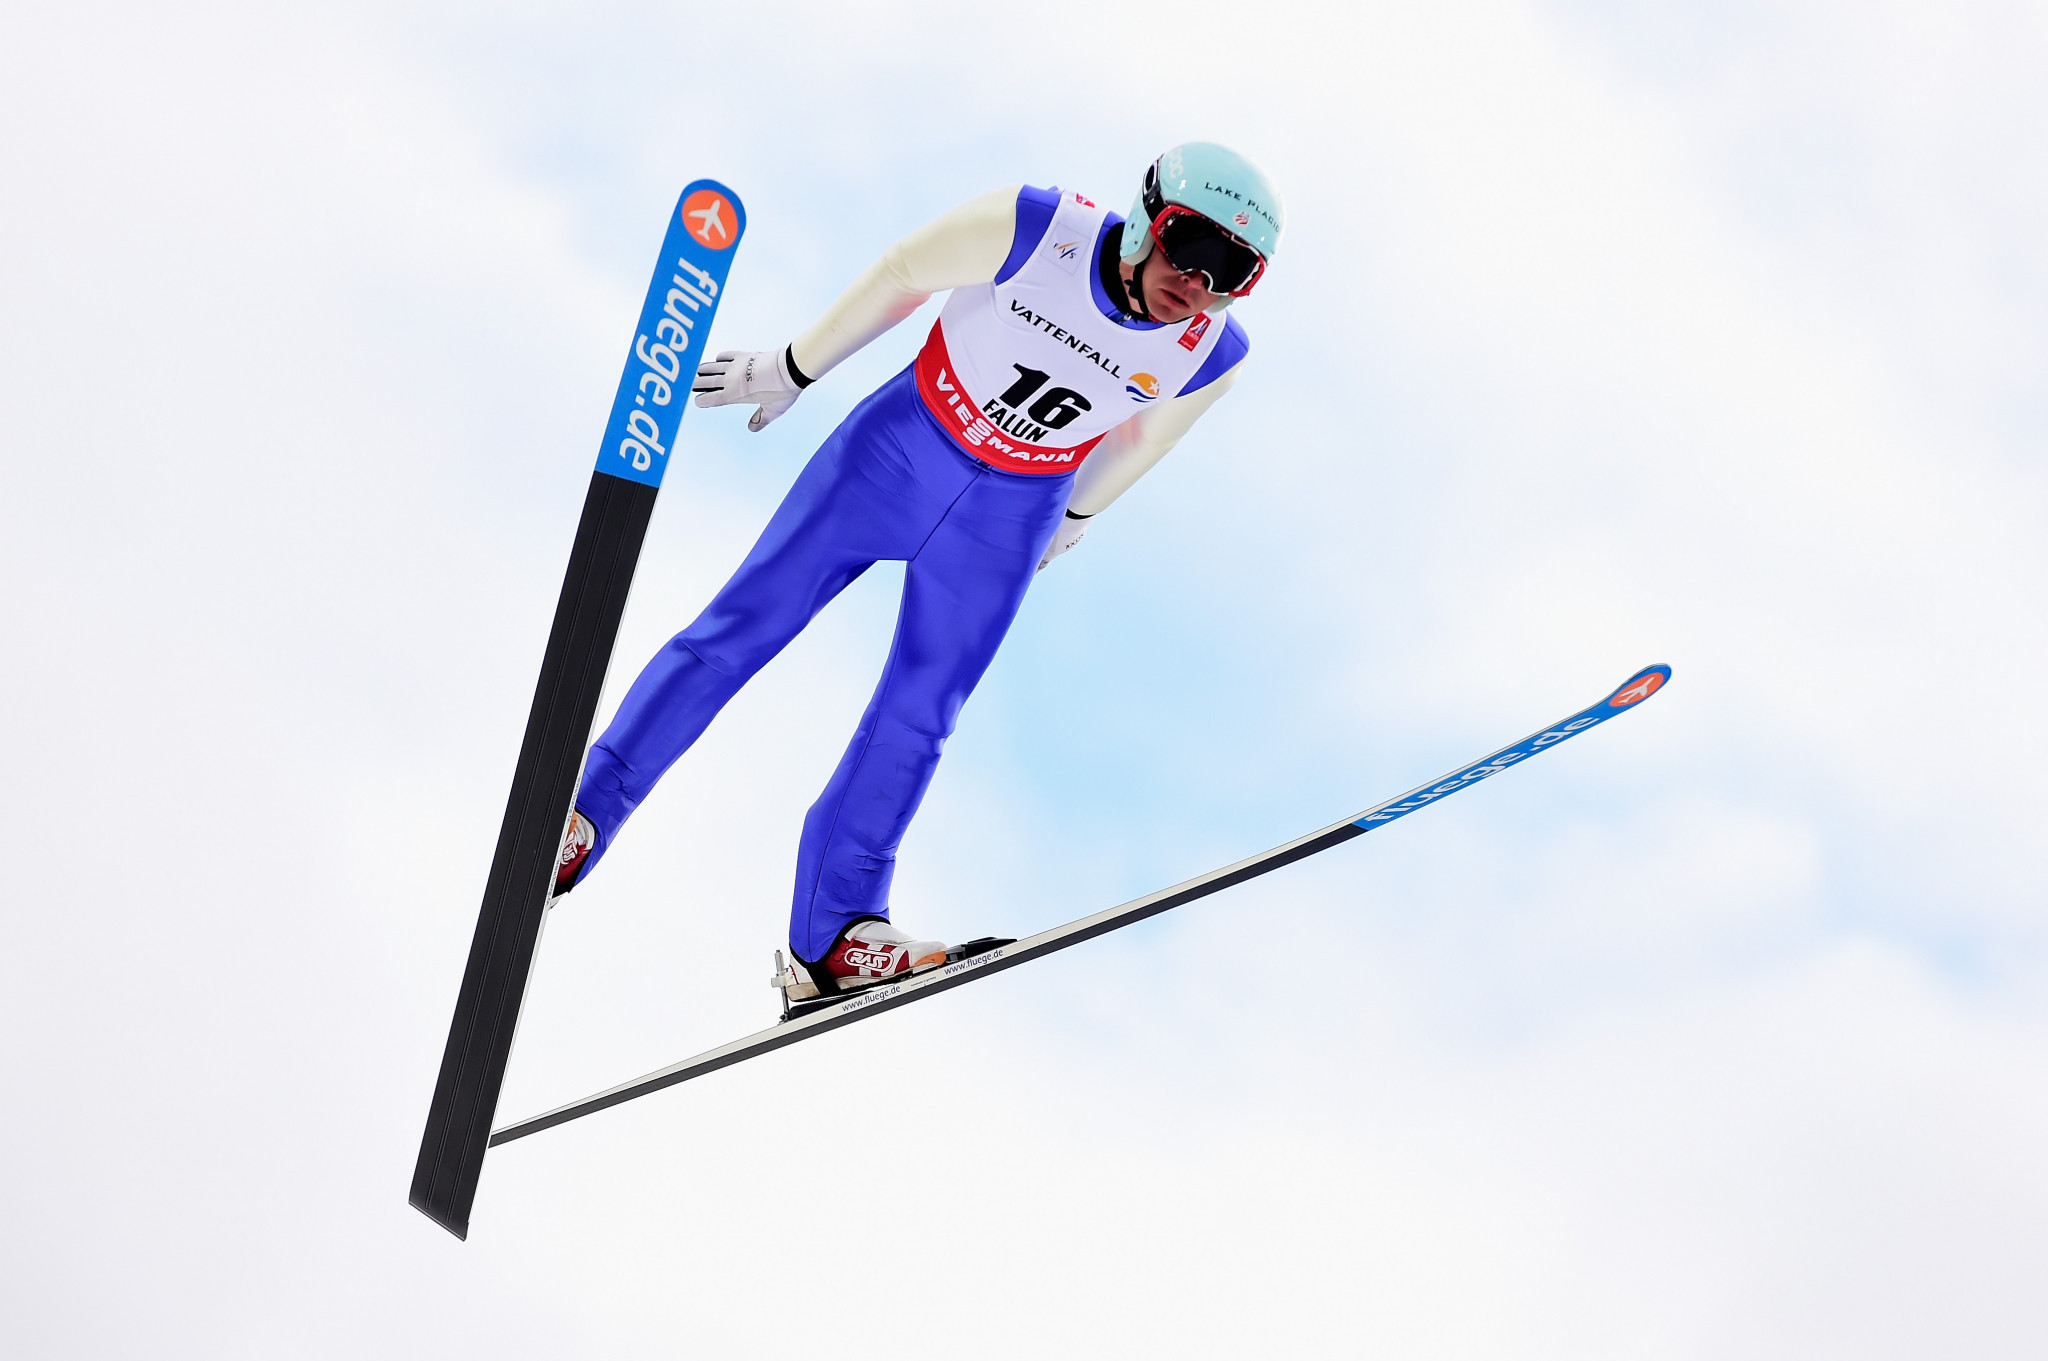 USA Nordic executive director Billy Demong said Michigan's award of the 2021 FIS Ski Jumping World Cup would be transformational for the region ©Getty Images